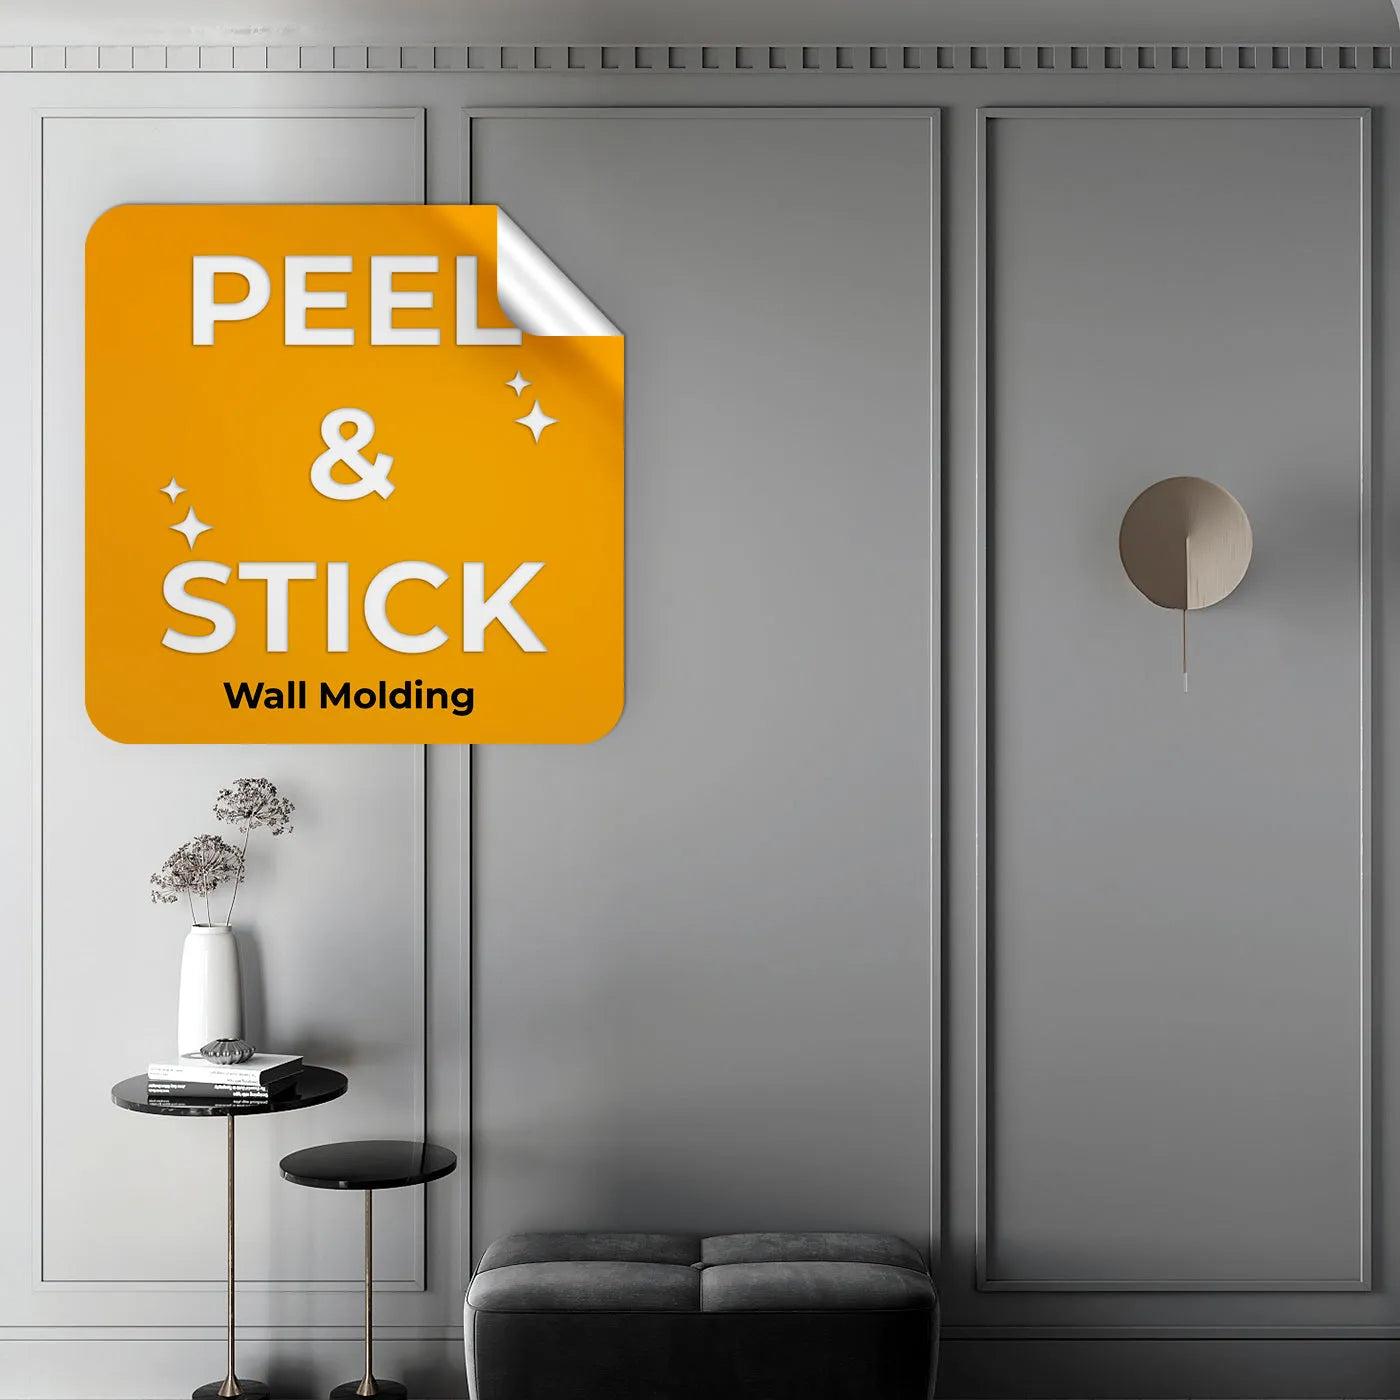 Peel and Stick Ready to Assemble Wall Molding Package - 3 Big